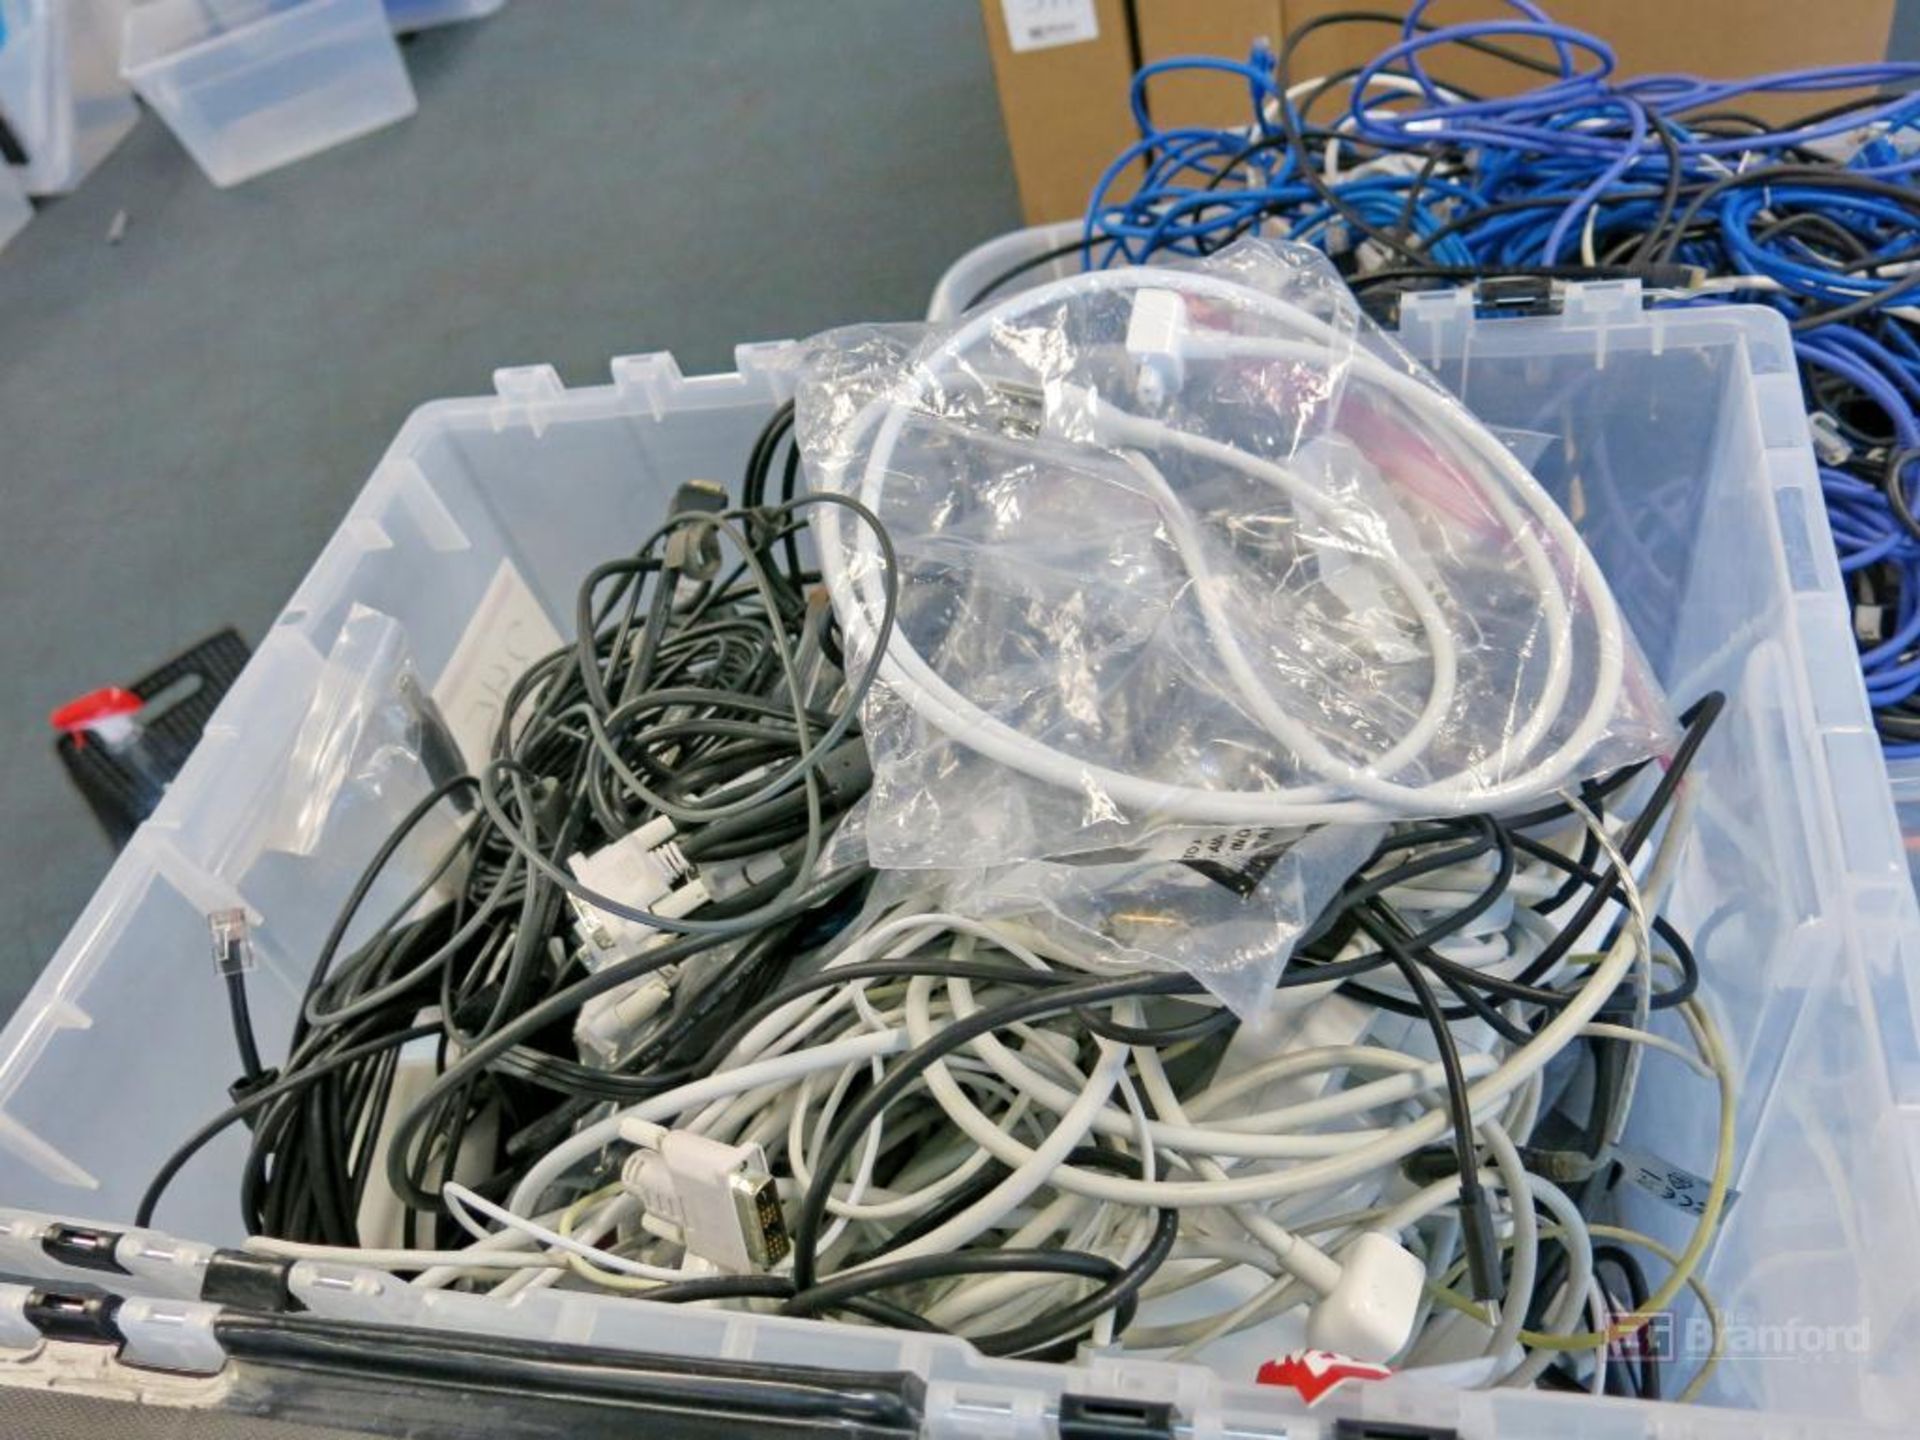 Large Lot of Cables - Image 5 of 6